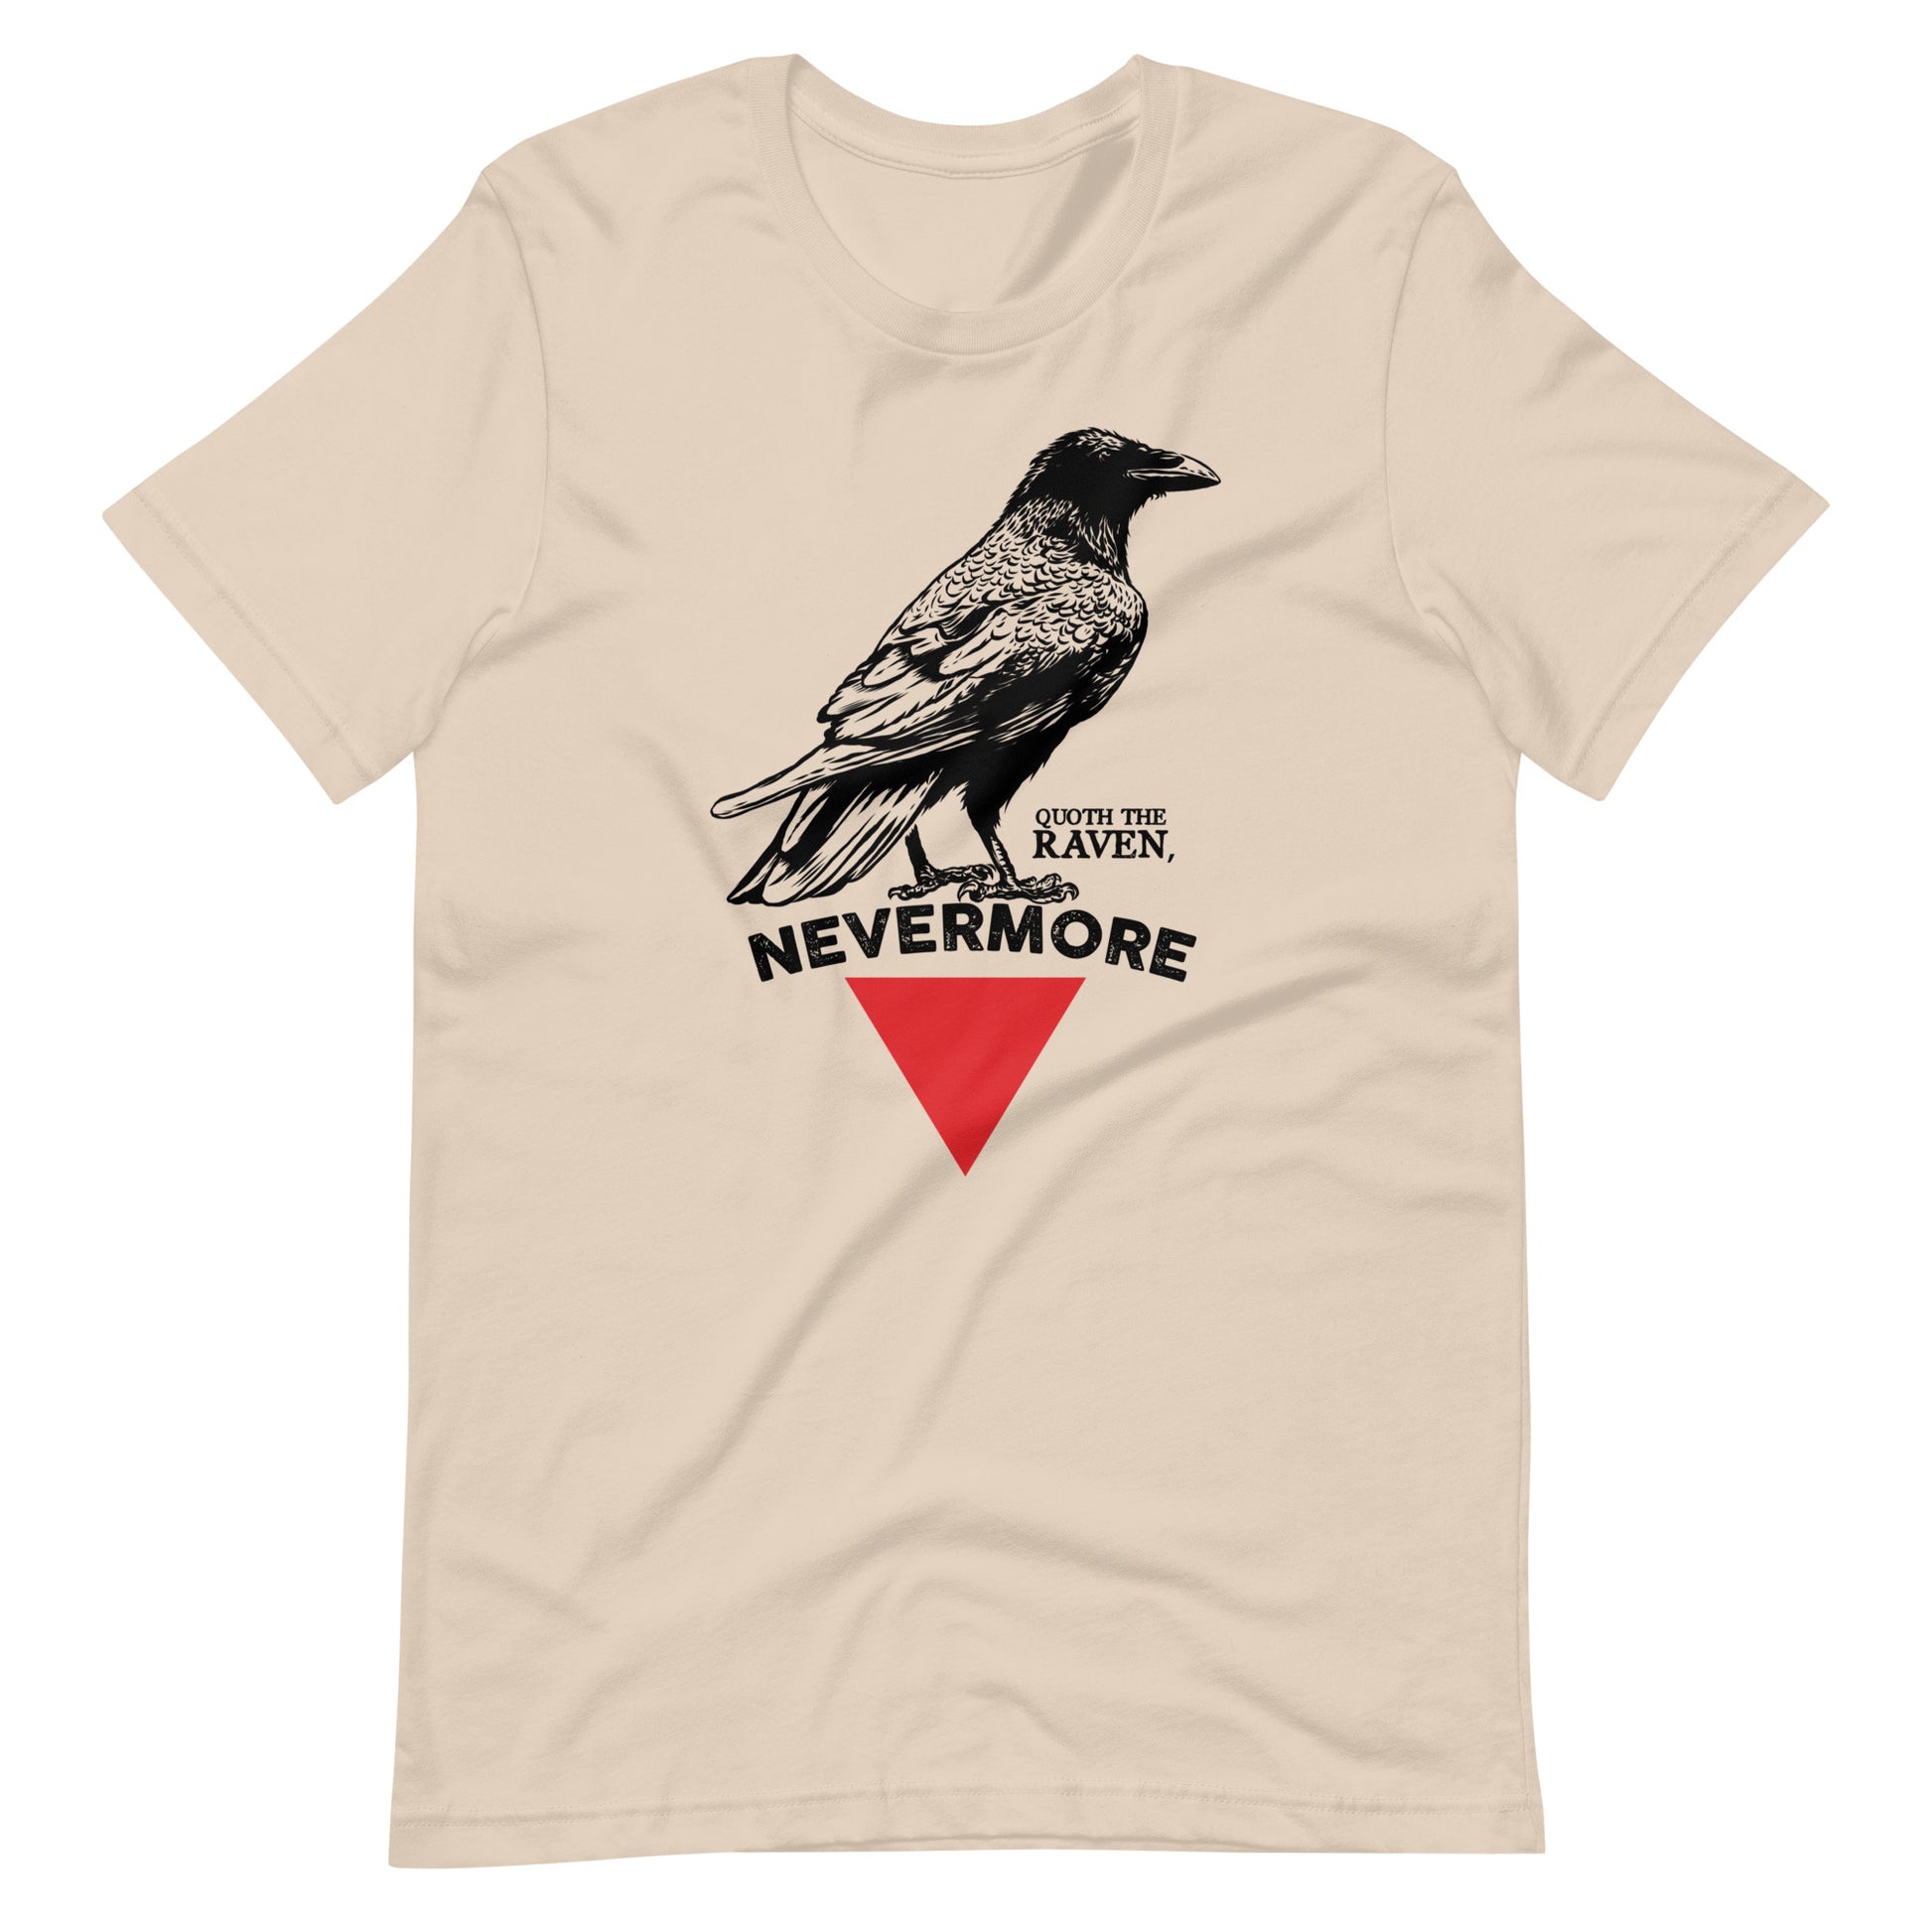 The Raven Nevermore Triangle - Men's t-shirt - Soft Cream Front